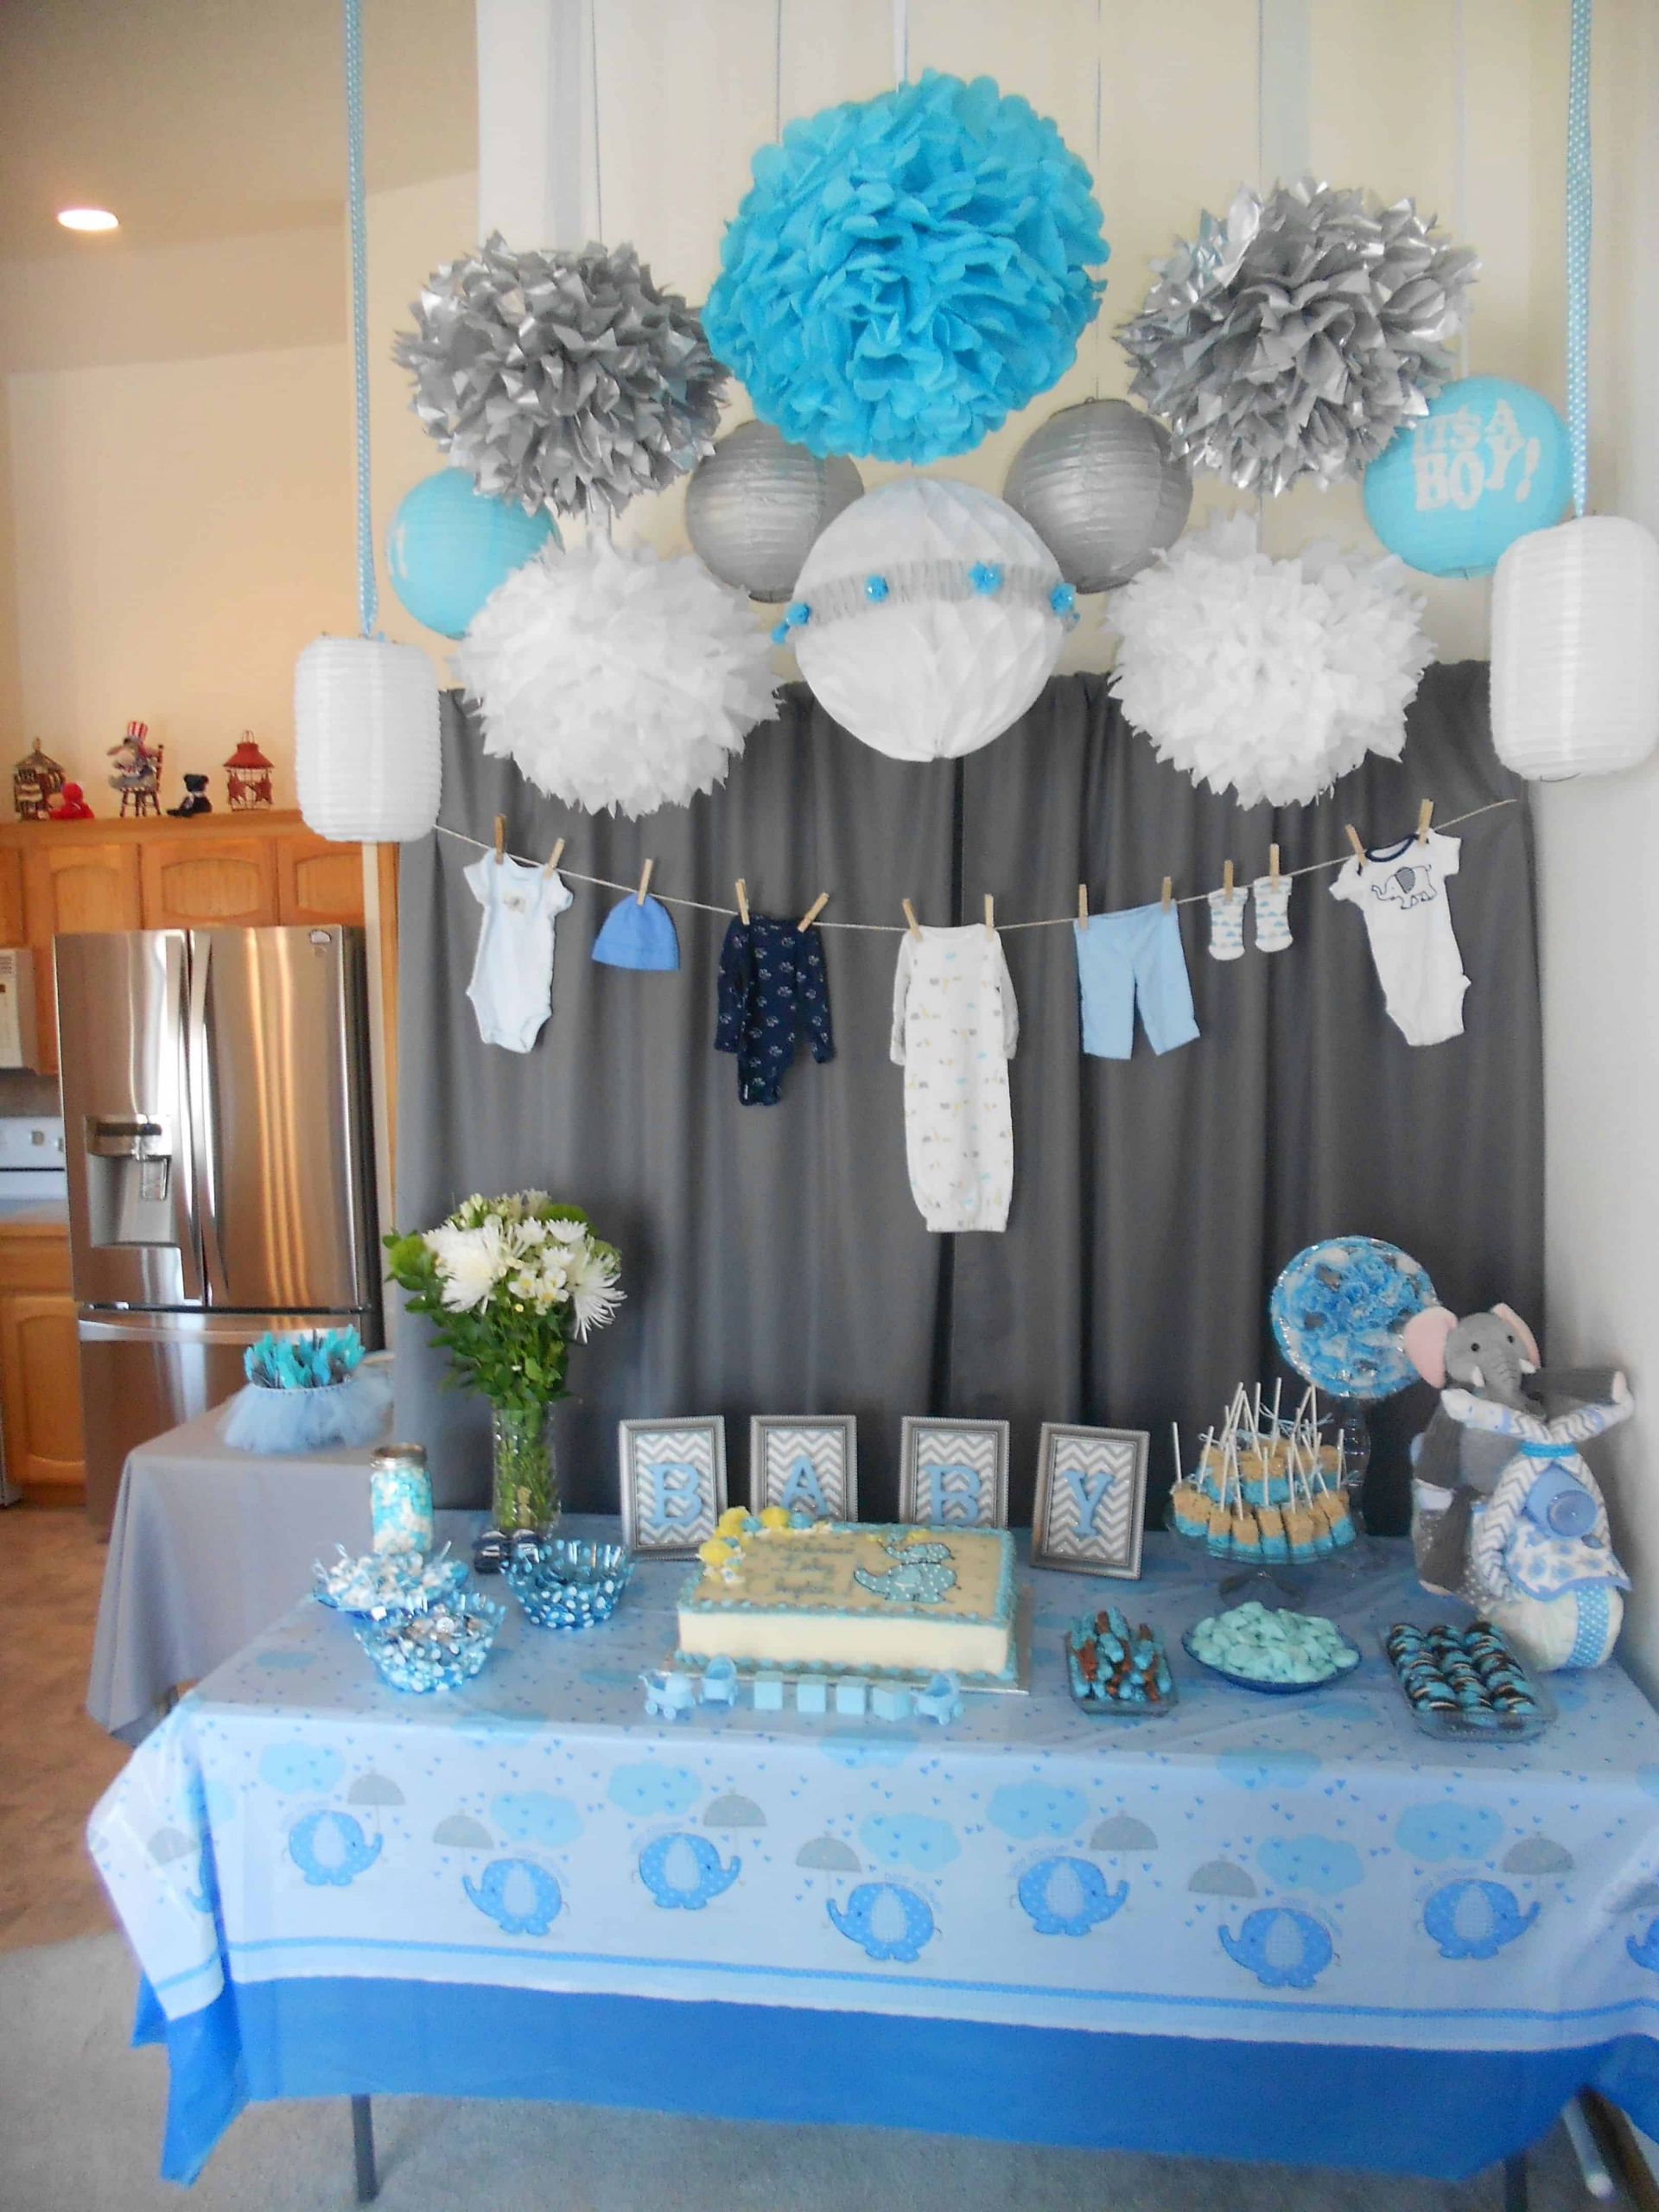 Baby Shower Decorating Ideas Pinterest
 17 Unique Baby Shower Ideas For Boys